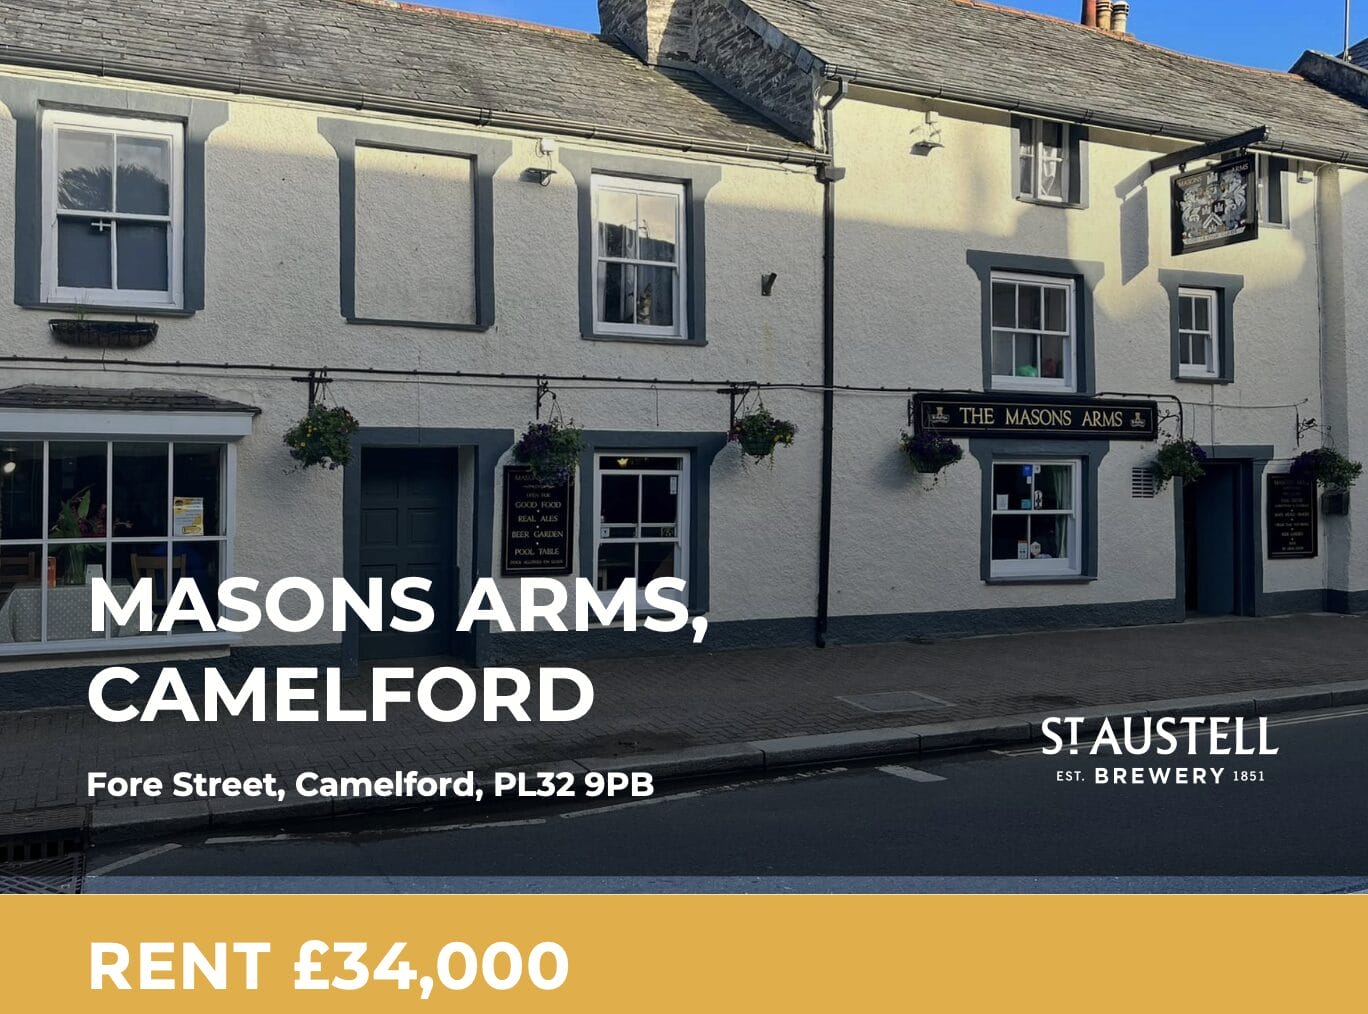 Let A Pub In Camelford – Run The Masons Arms !